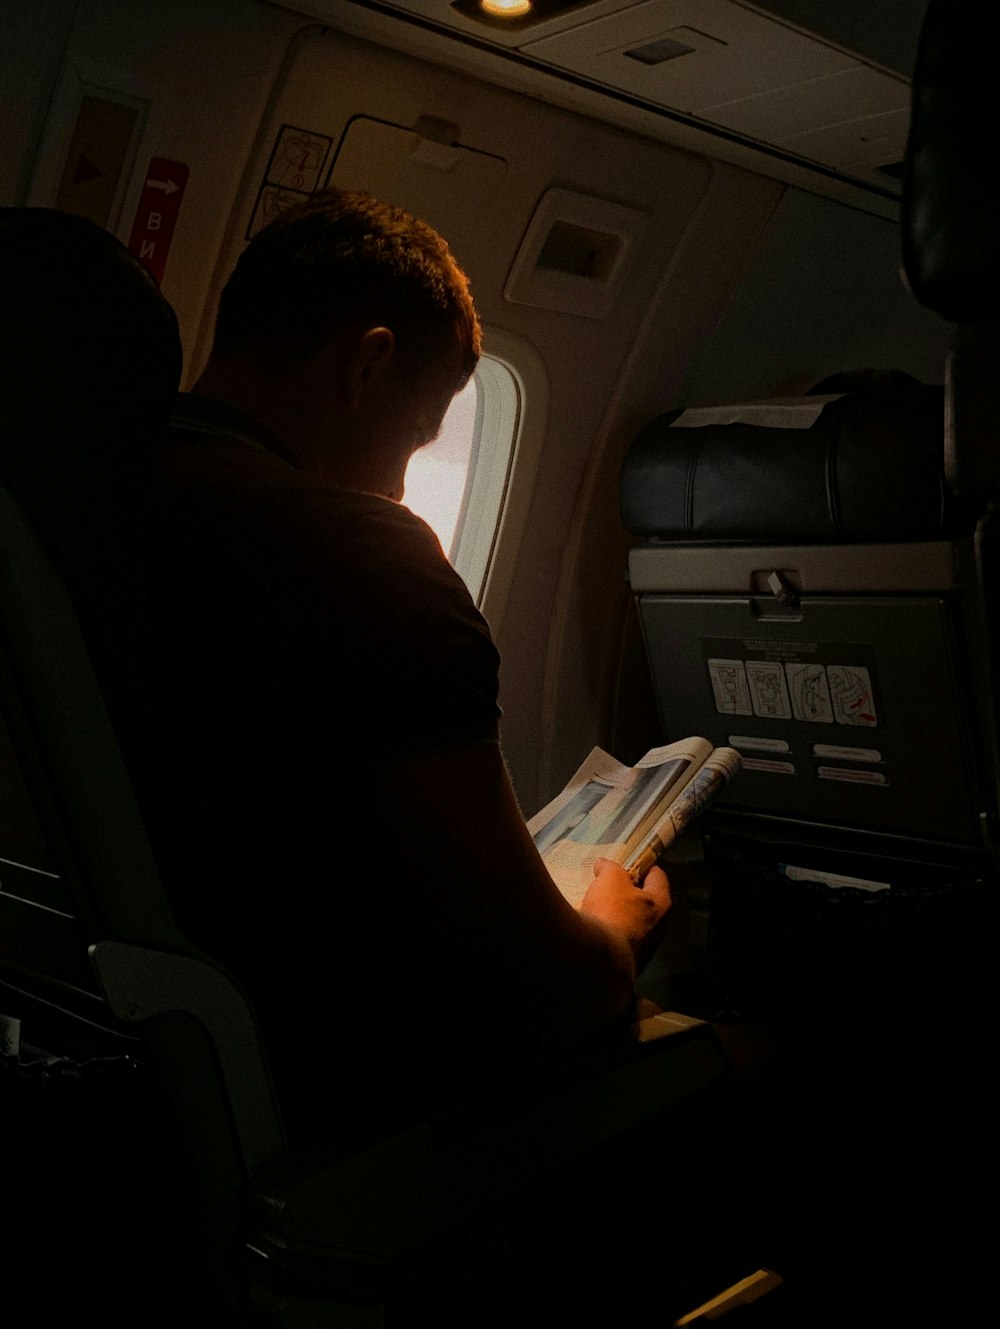 man reading book in airplane